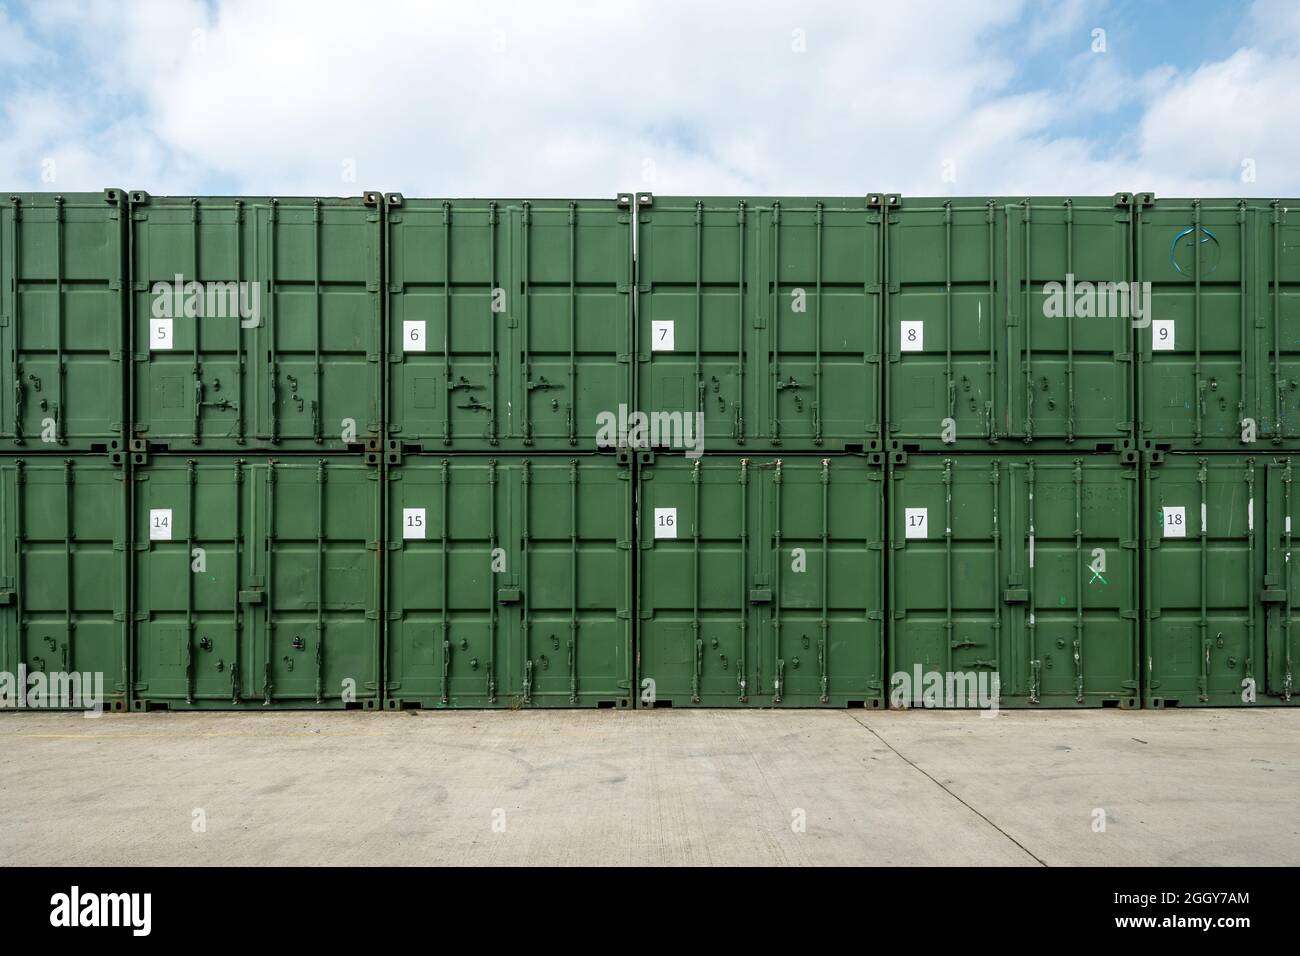 https://c8.alamy.com/comp/2GGY7AM/row-of-storage-containers-large-green-shipping-containers-stacked-two-high-and-numbered-2GGY7AM.jpg